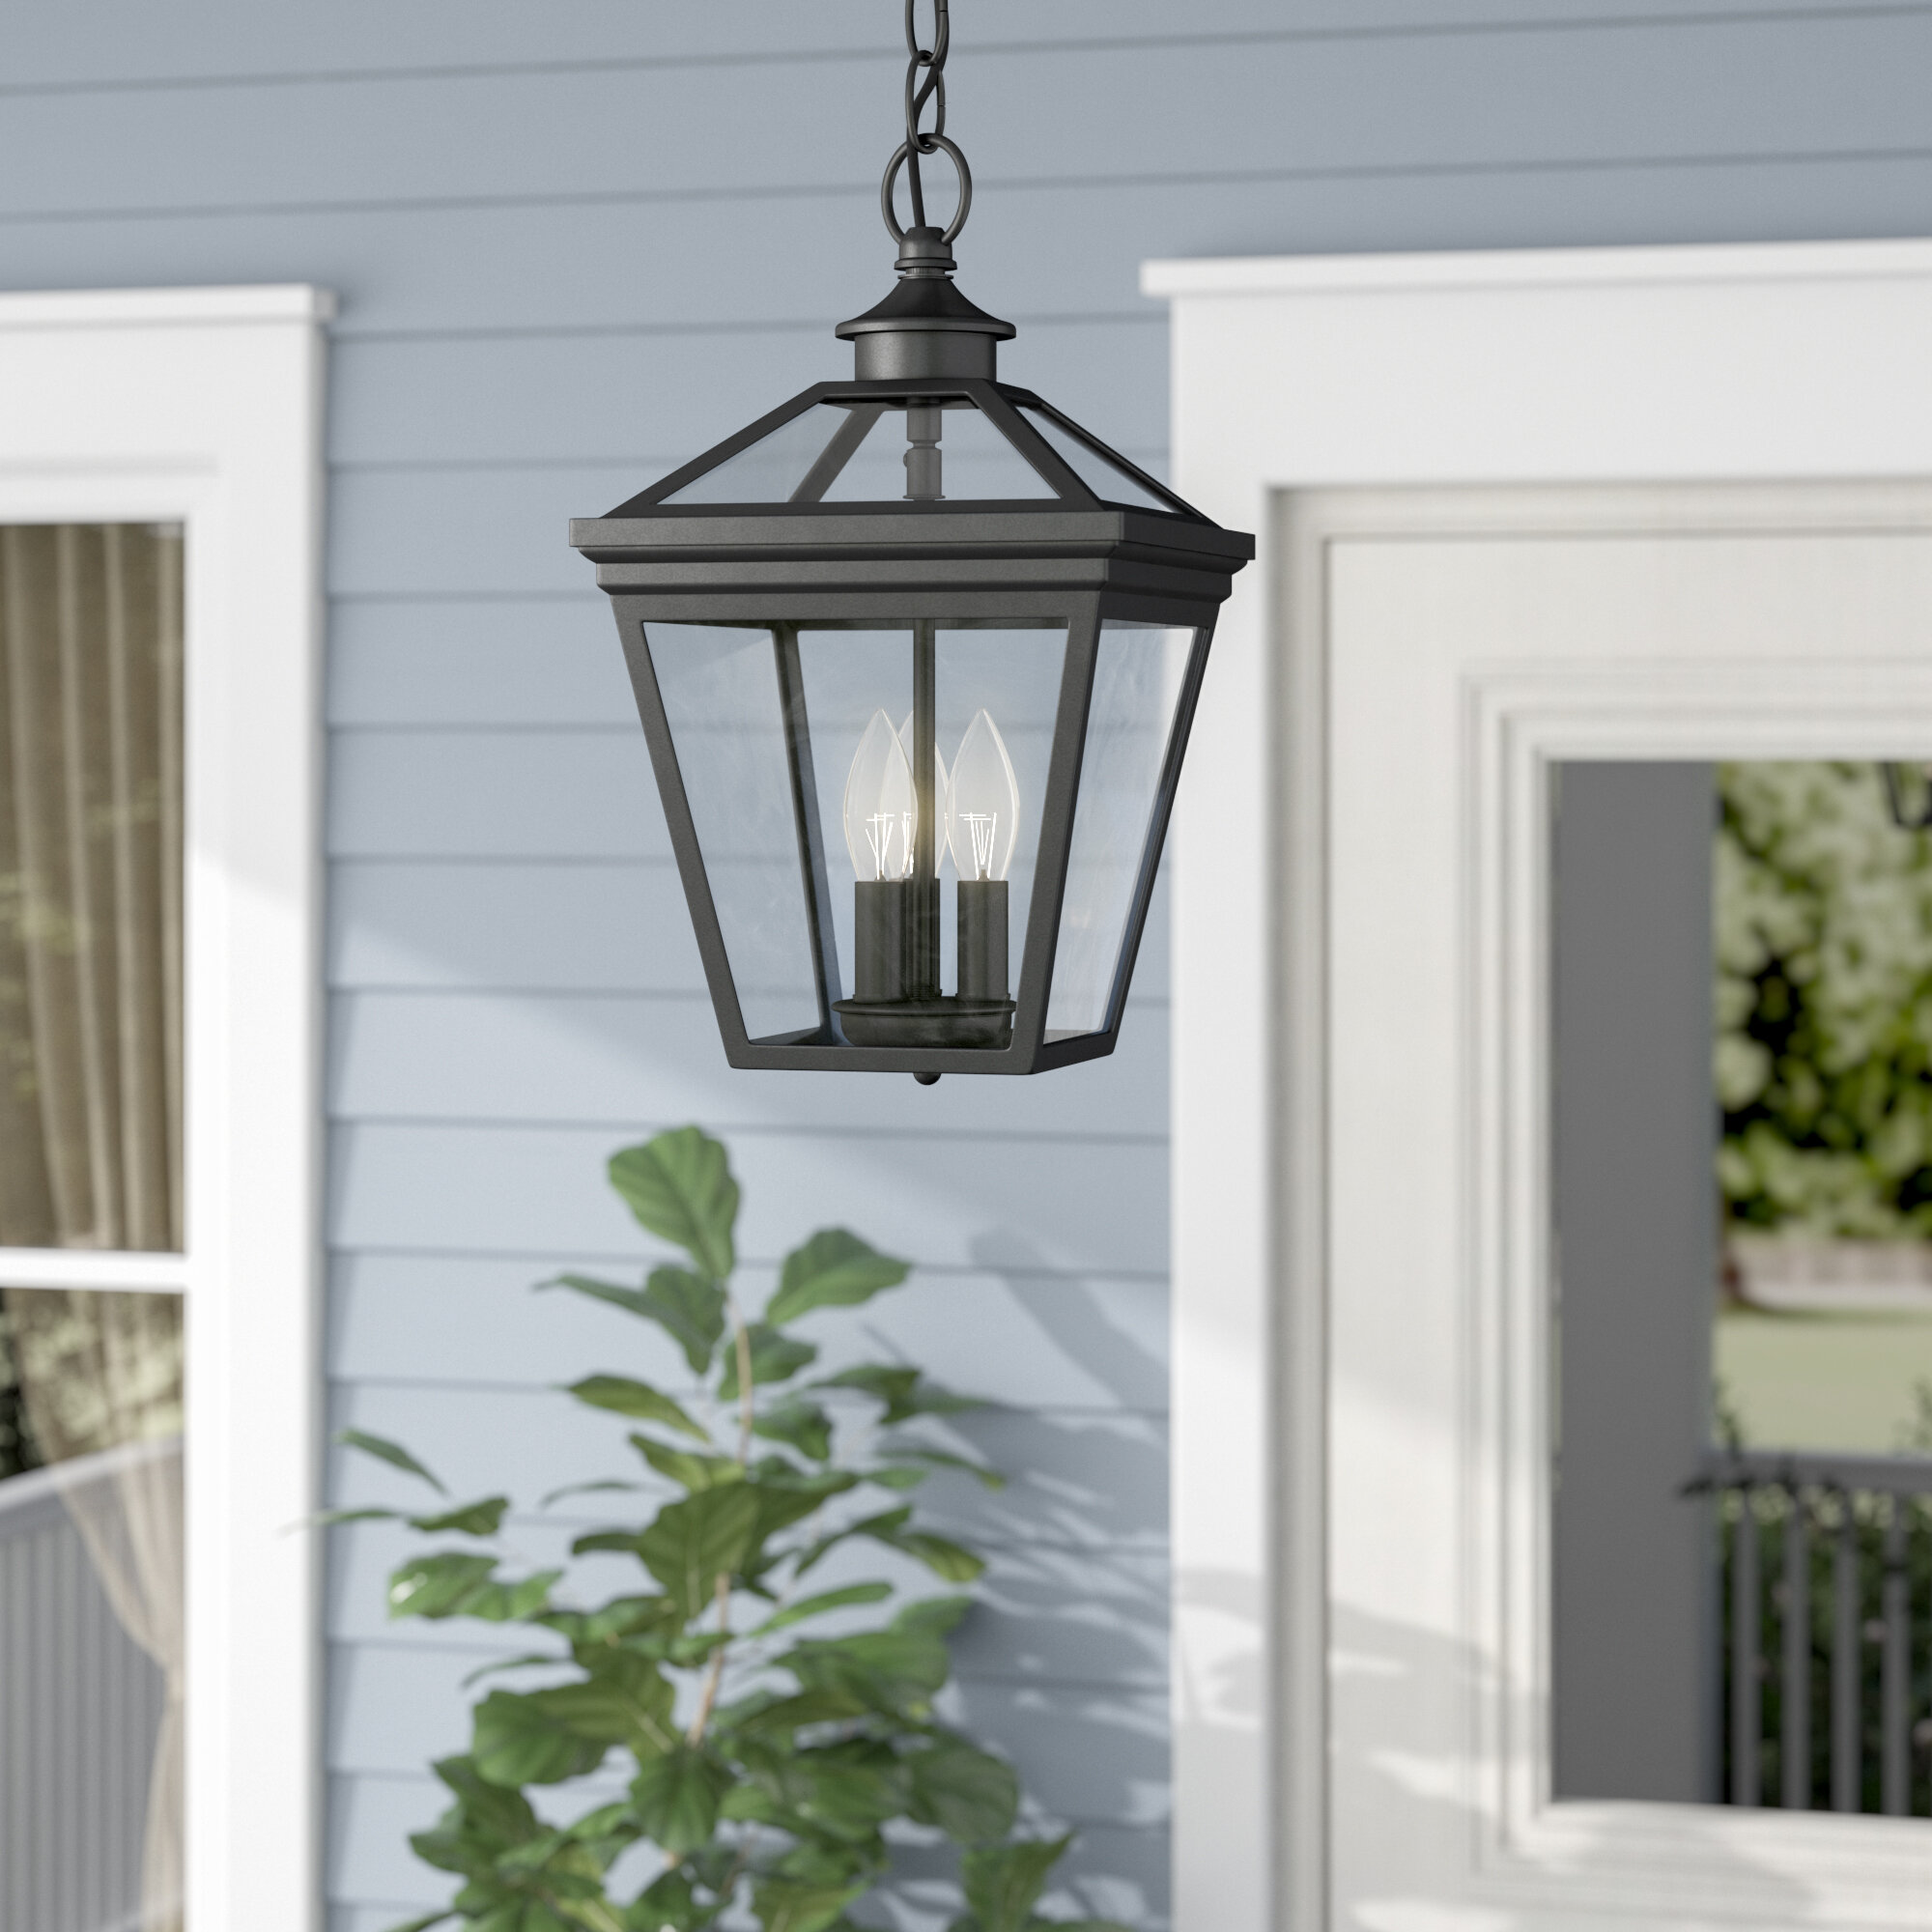 Porch Light Fixture Outdoor Ceiling Pendant Globe Front Hanging Chain Industrial 